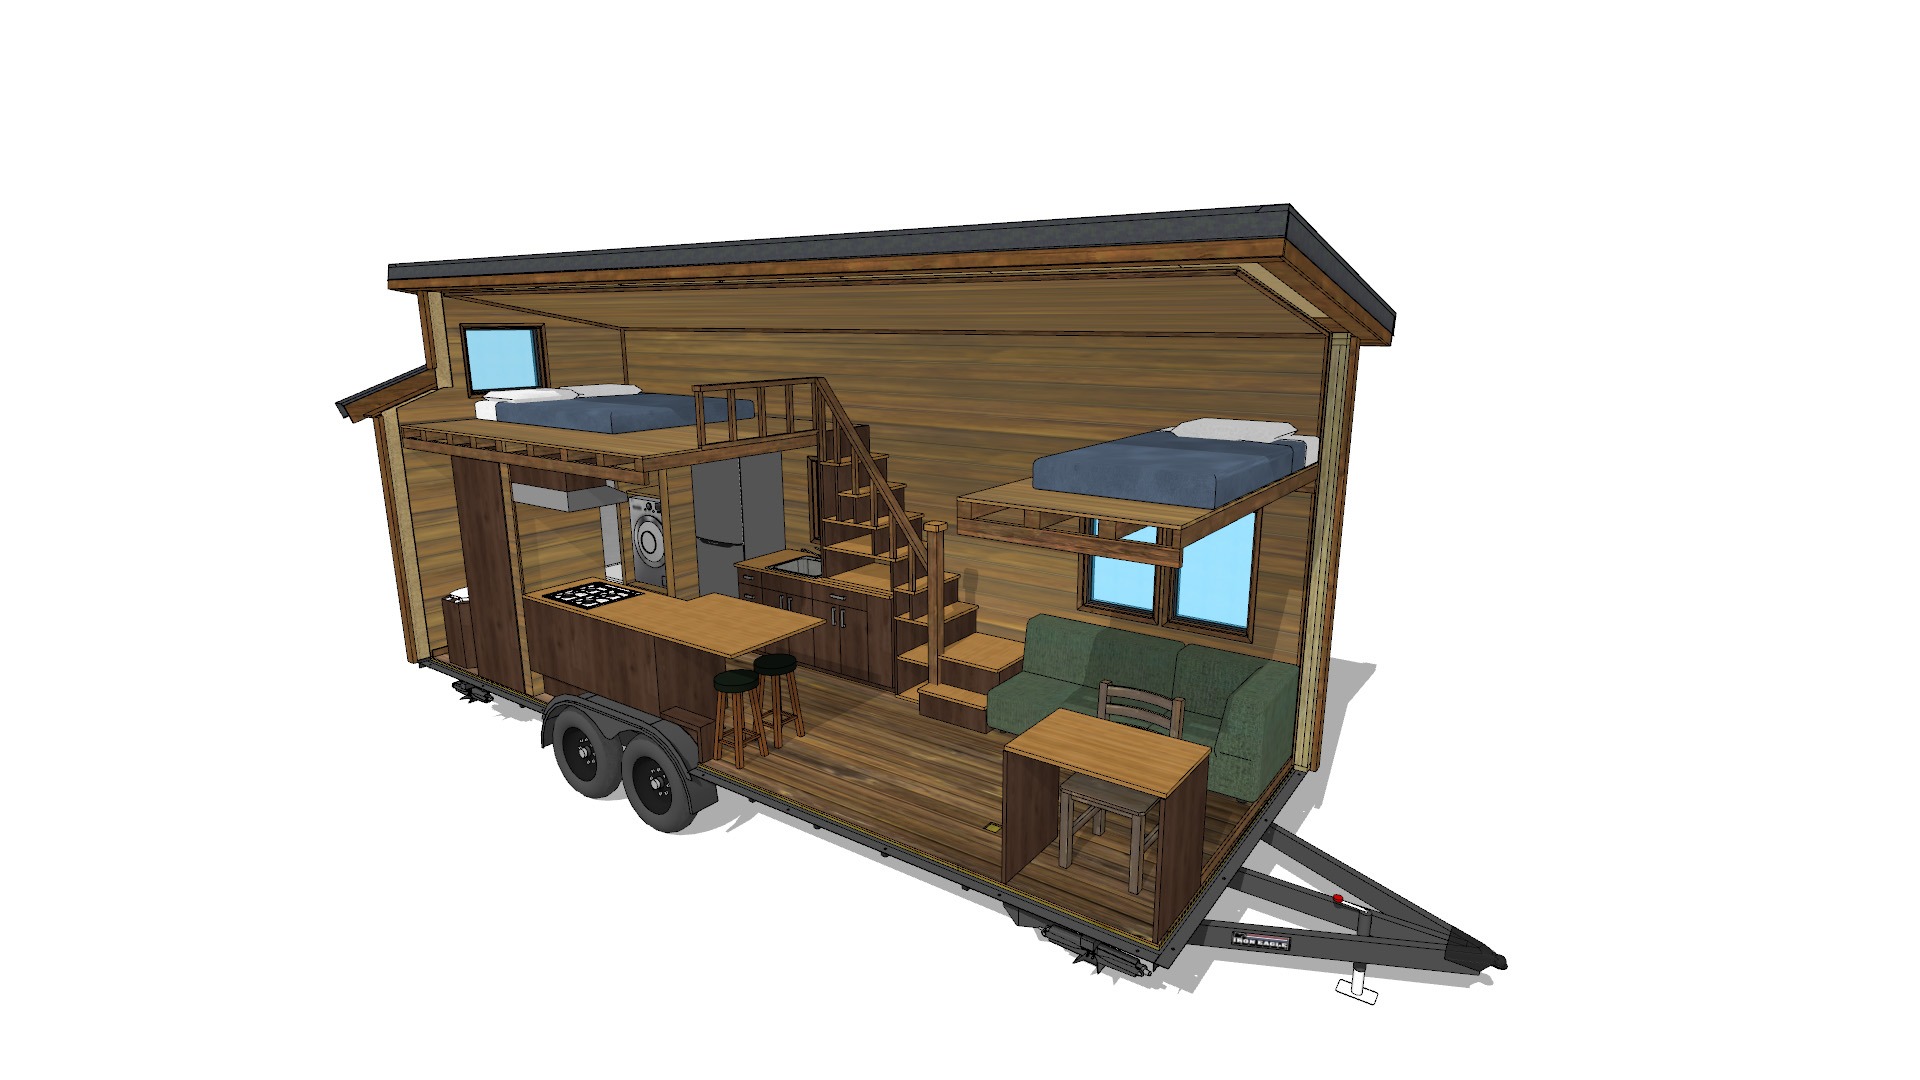 Design A Tiny House On Wheels Tips And